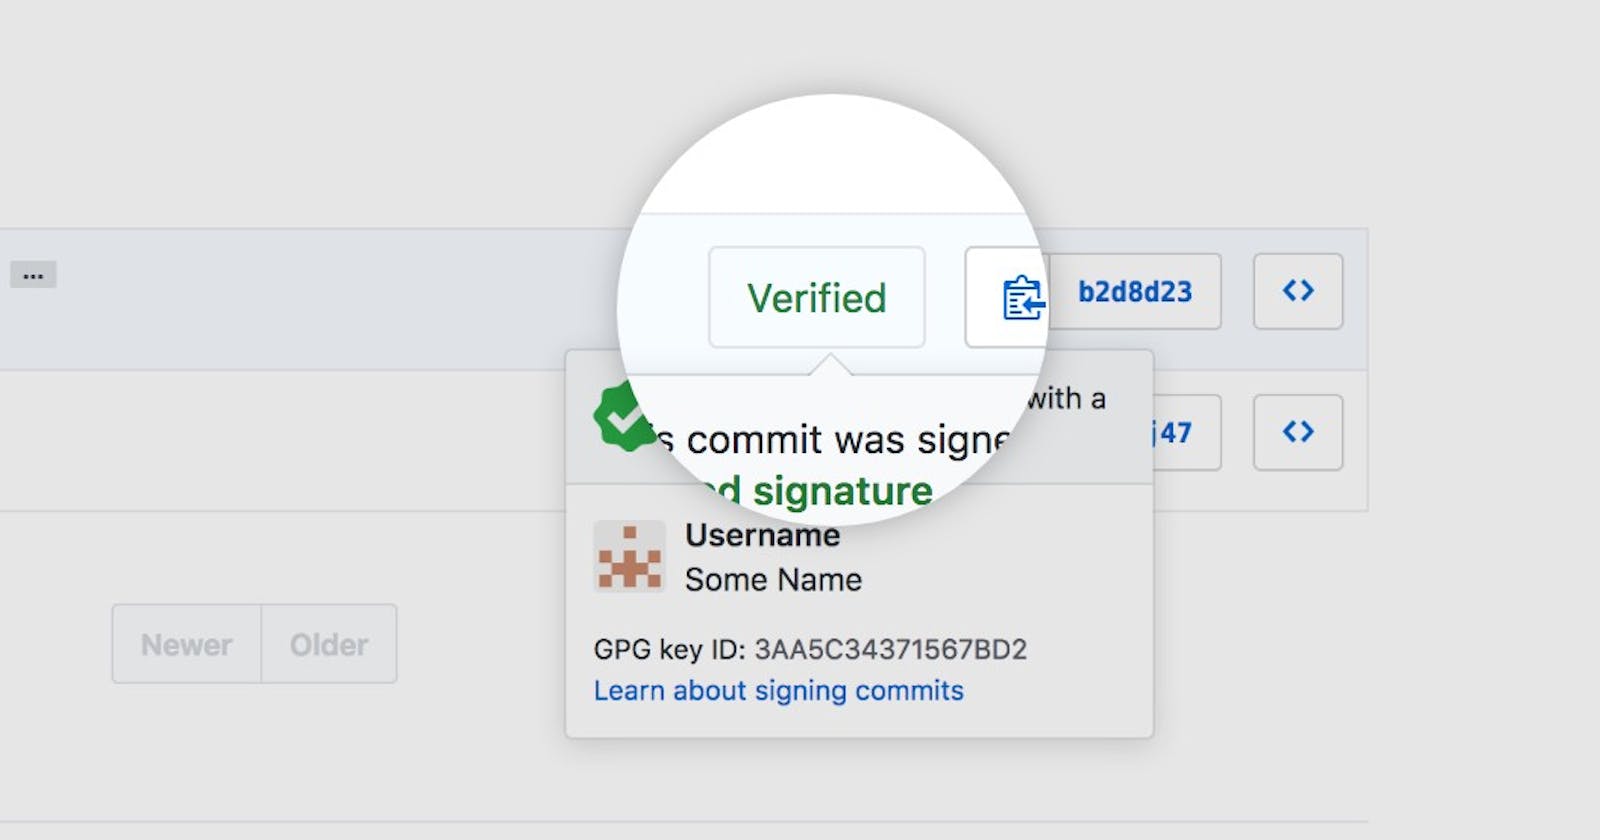 How to Verify your Commits in GitHub